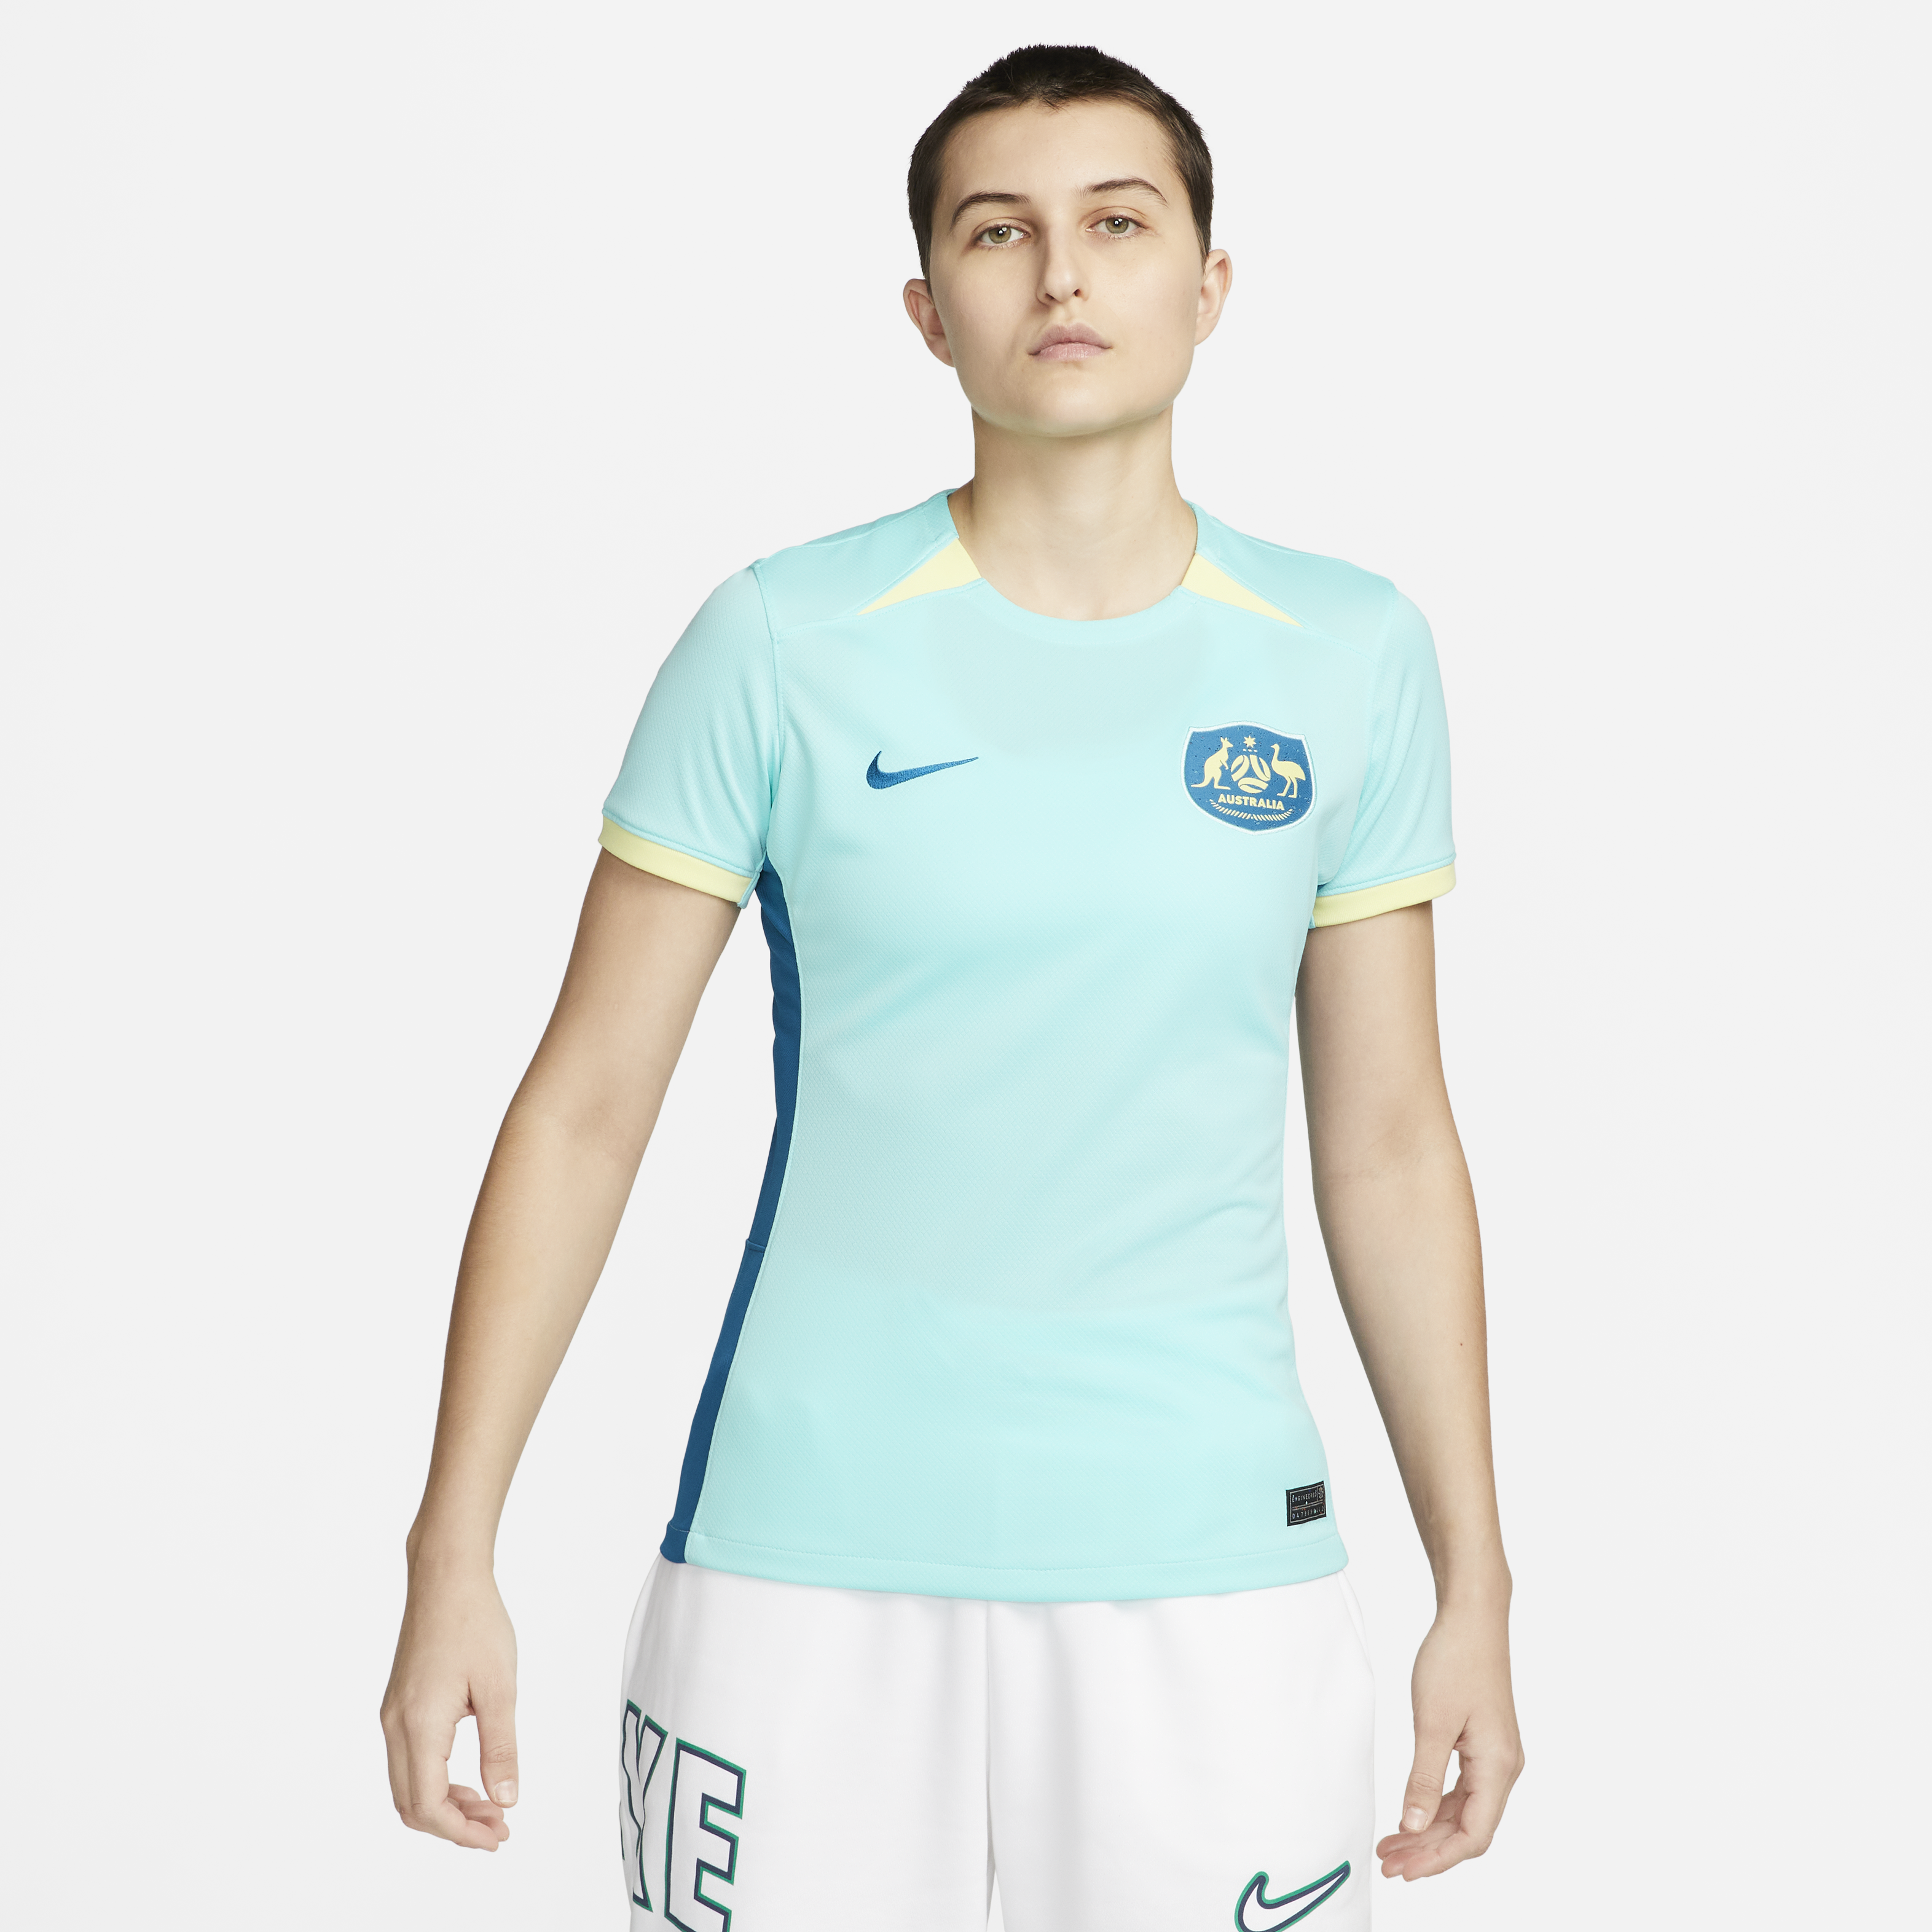 Women's World Cup: From hand-me-downs to period proofing, the Matildas'  kits reflect the evolution of women's football - ABC News